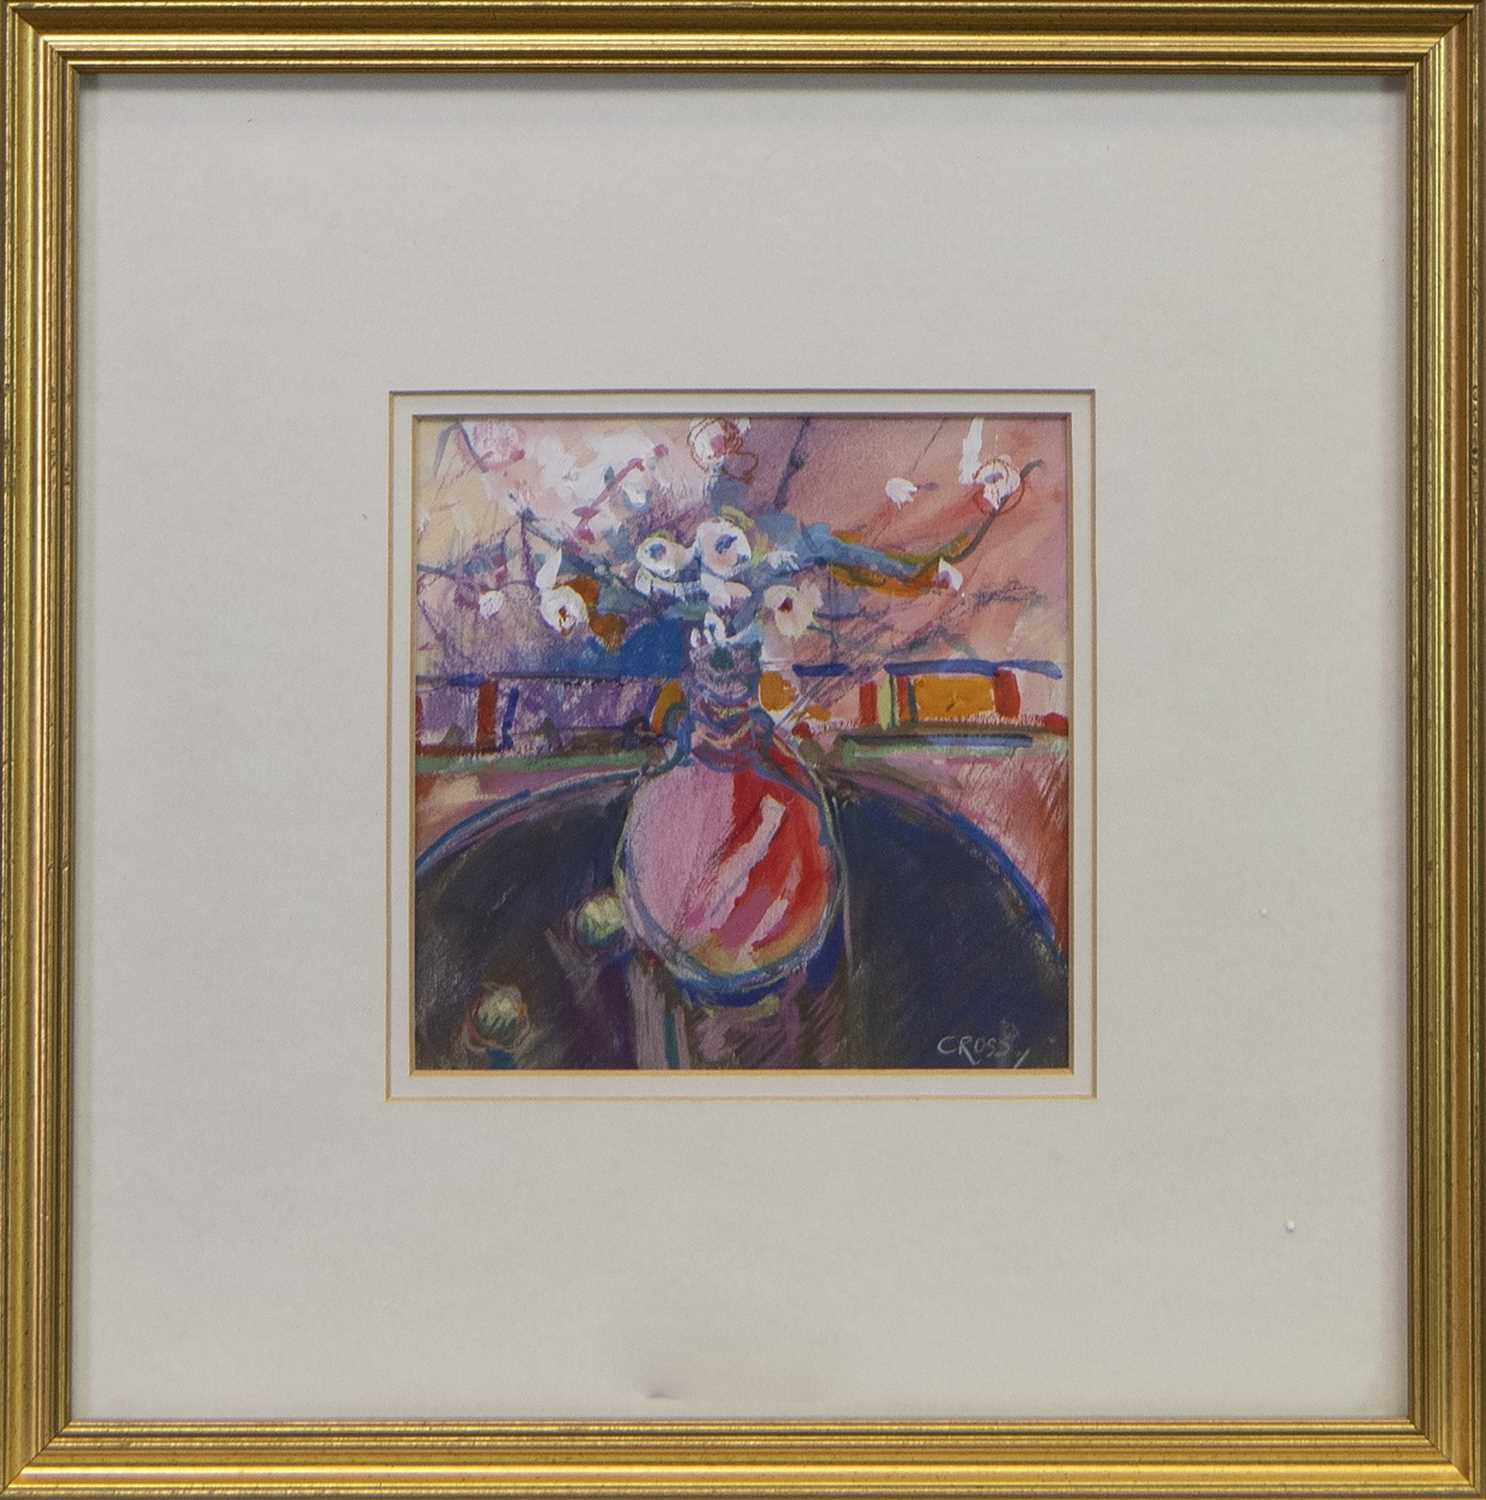 Lot 592 - STILL LIFE OF FLOWERS IN A VASE, A MIXED MEDIA BY ANDREW CROSS